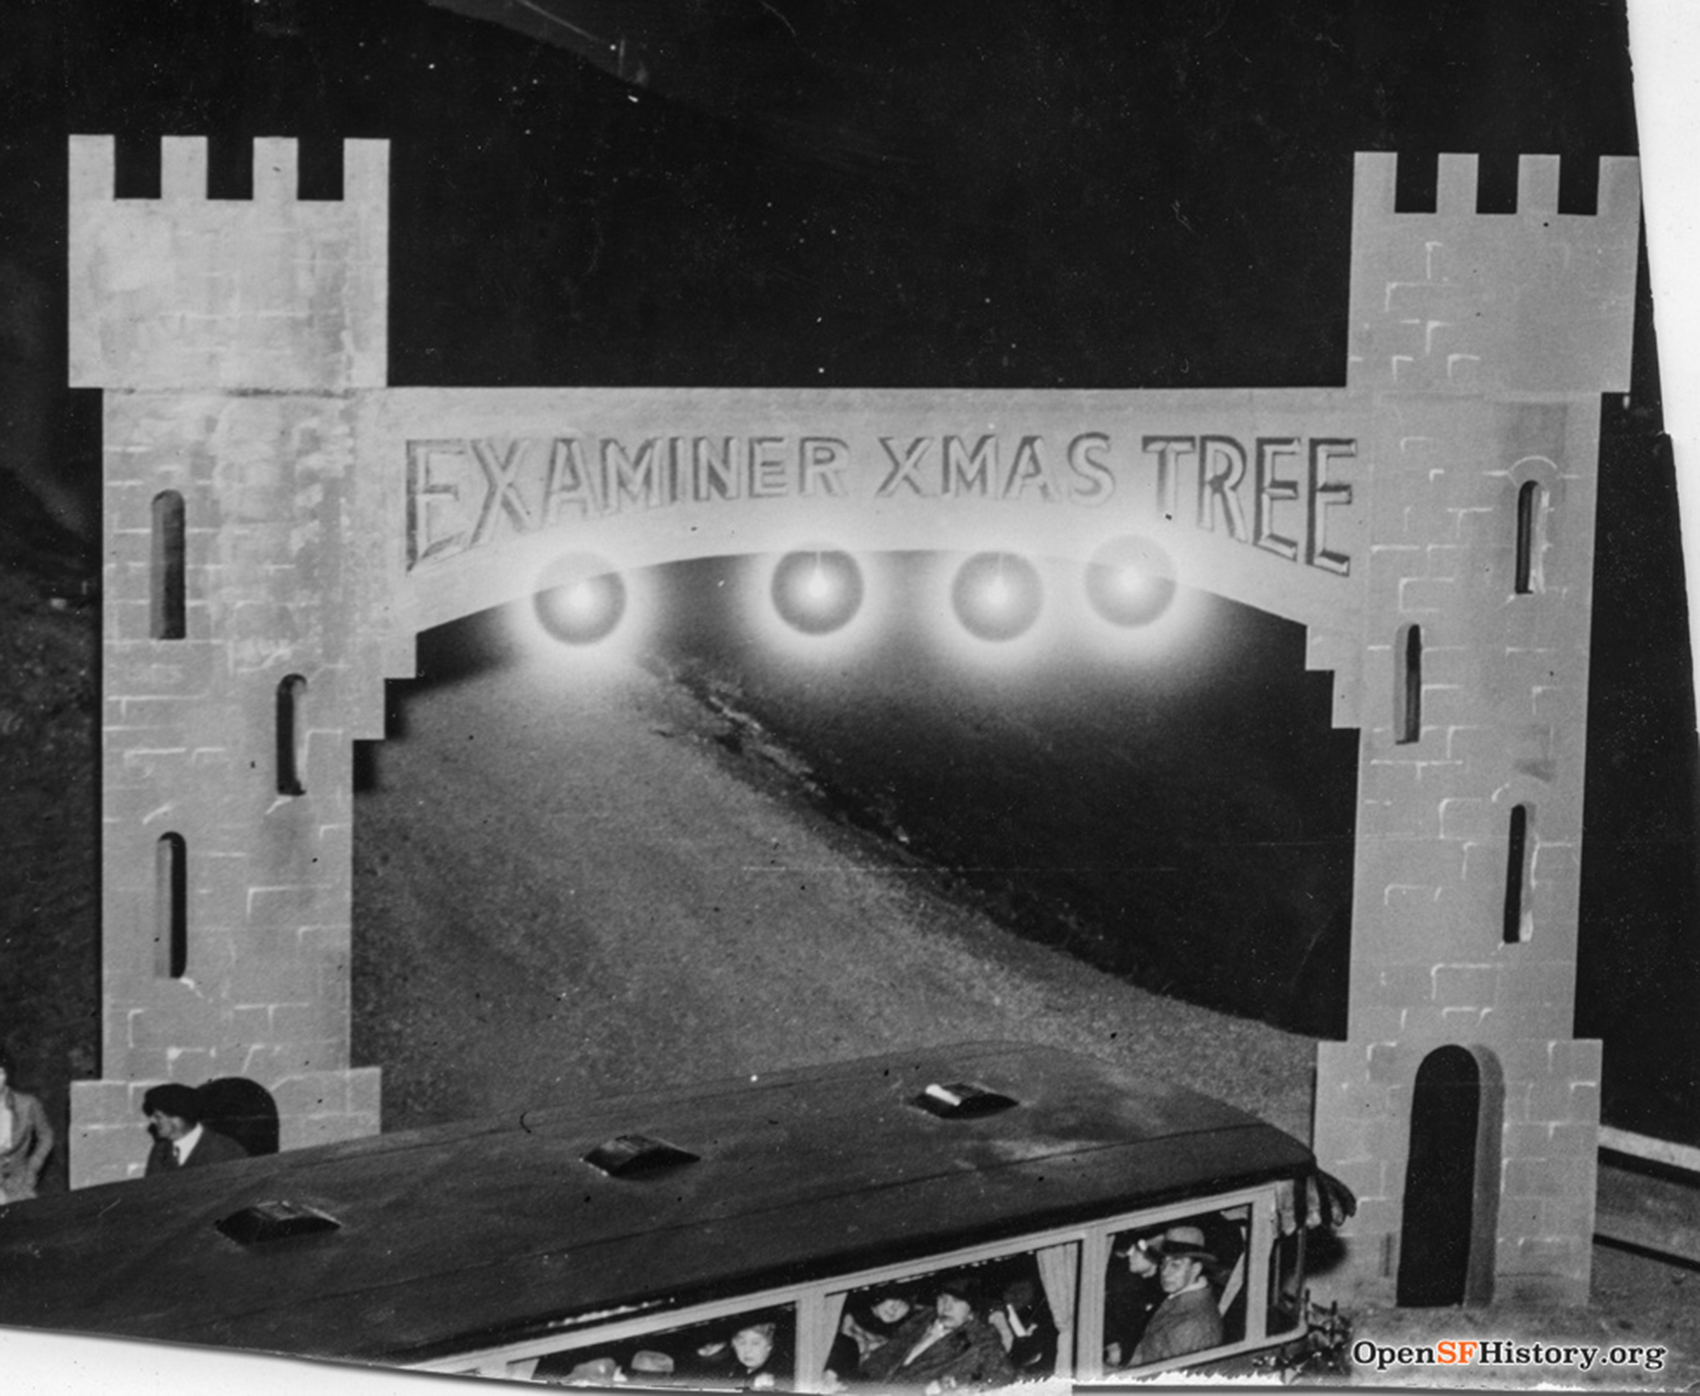 A medieval-style castle gate welcomes tourists in a black and white image taken at night.